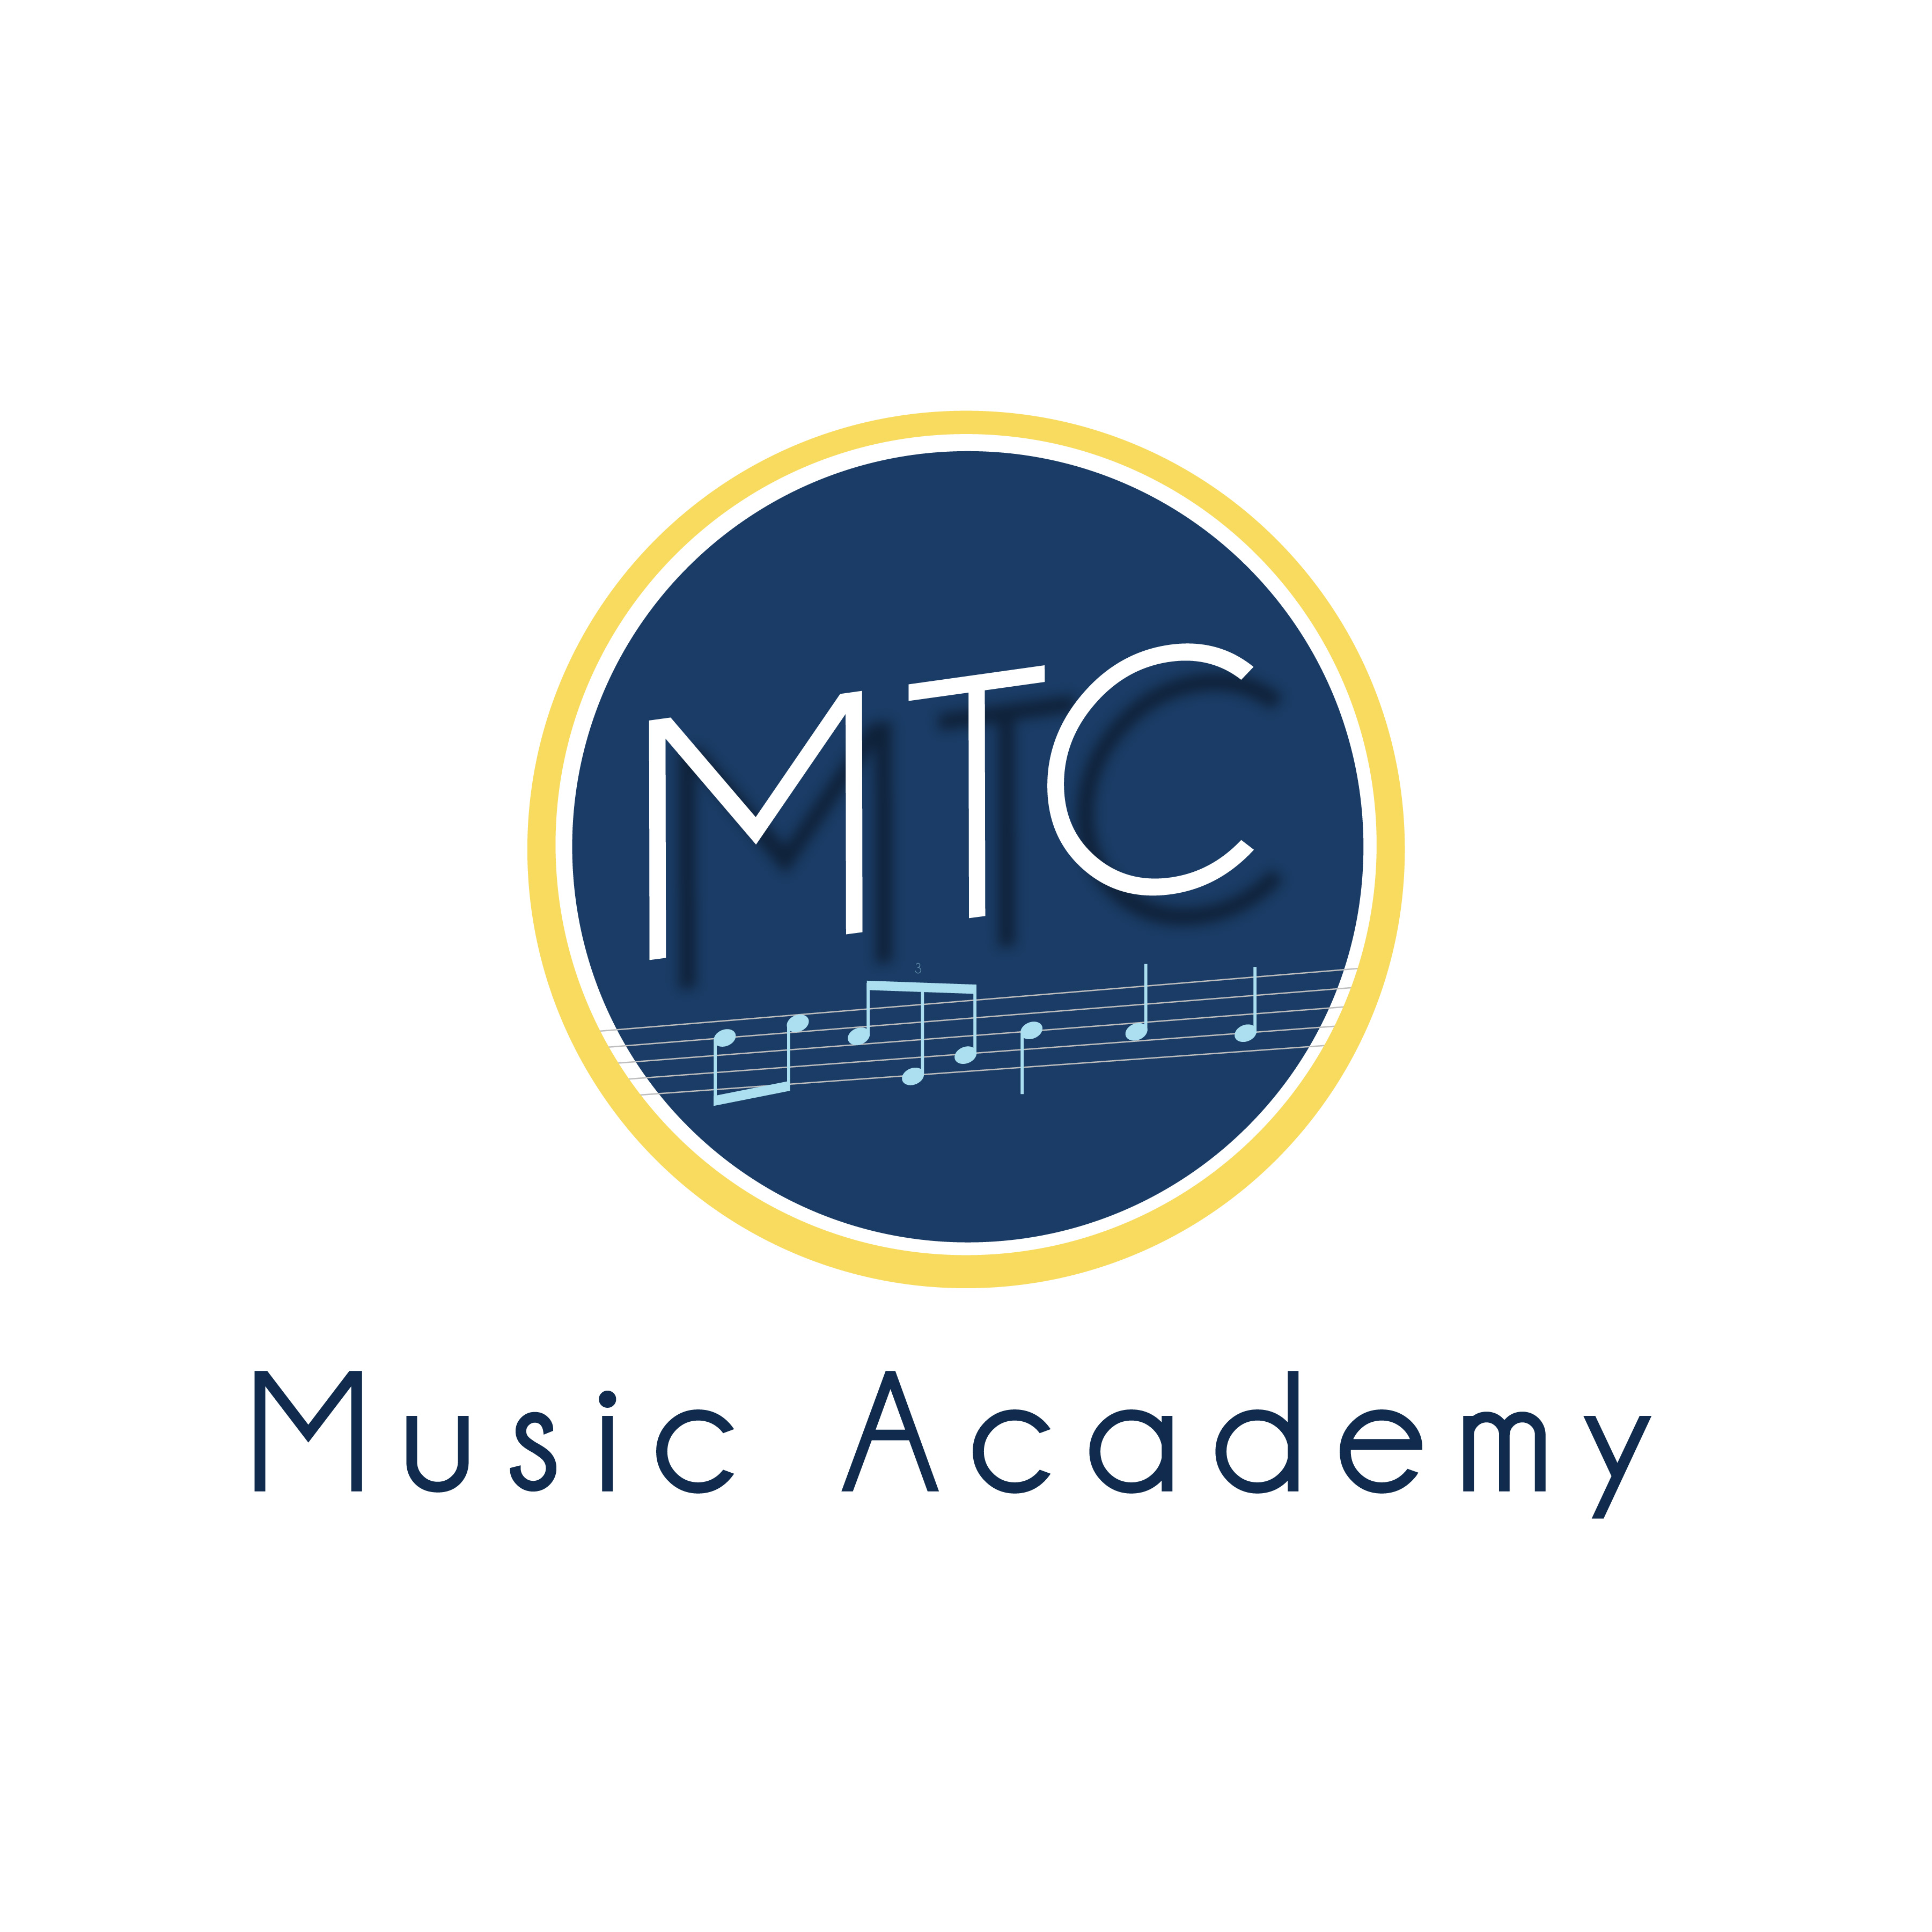 MTC Music Academy Announces 5 Week Vocal Masterclass with Special Guests And Personalized Audition Material 